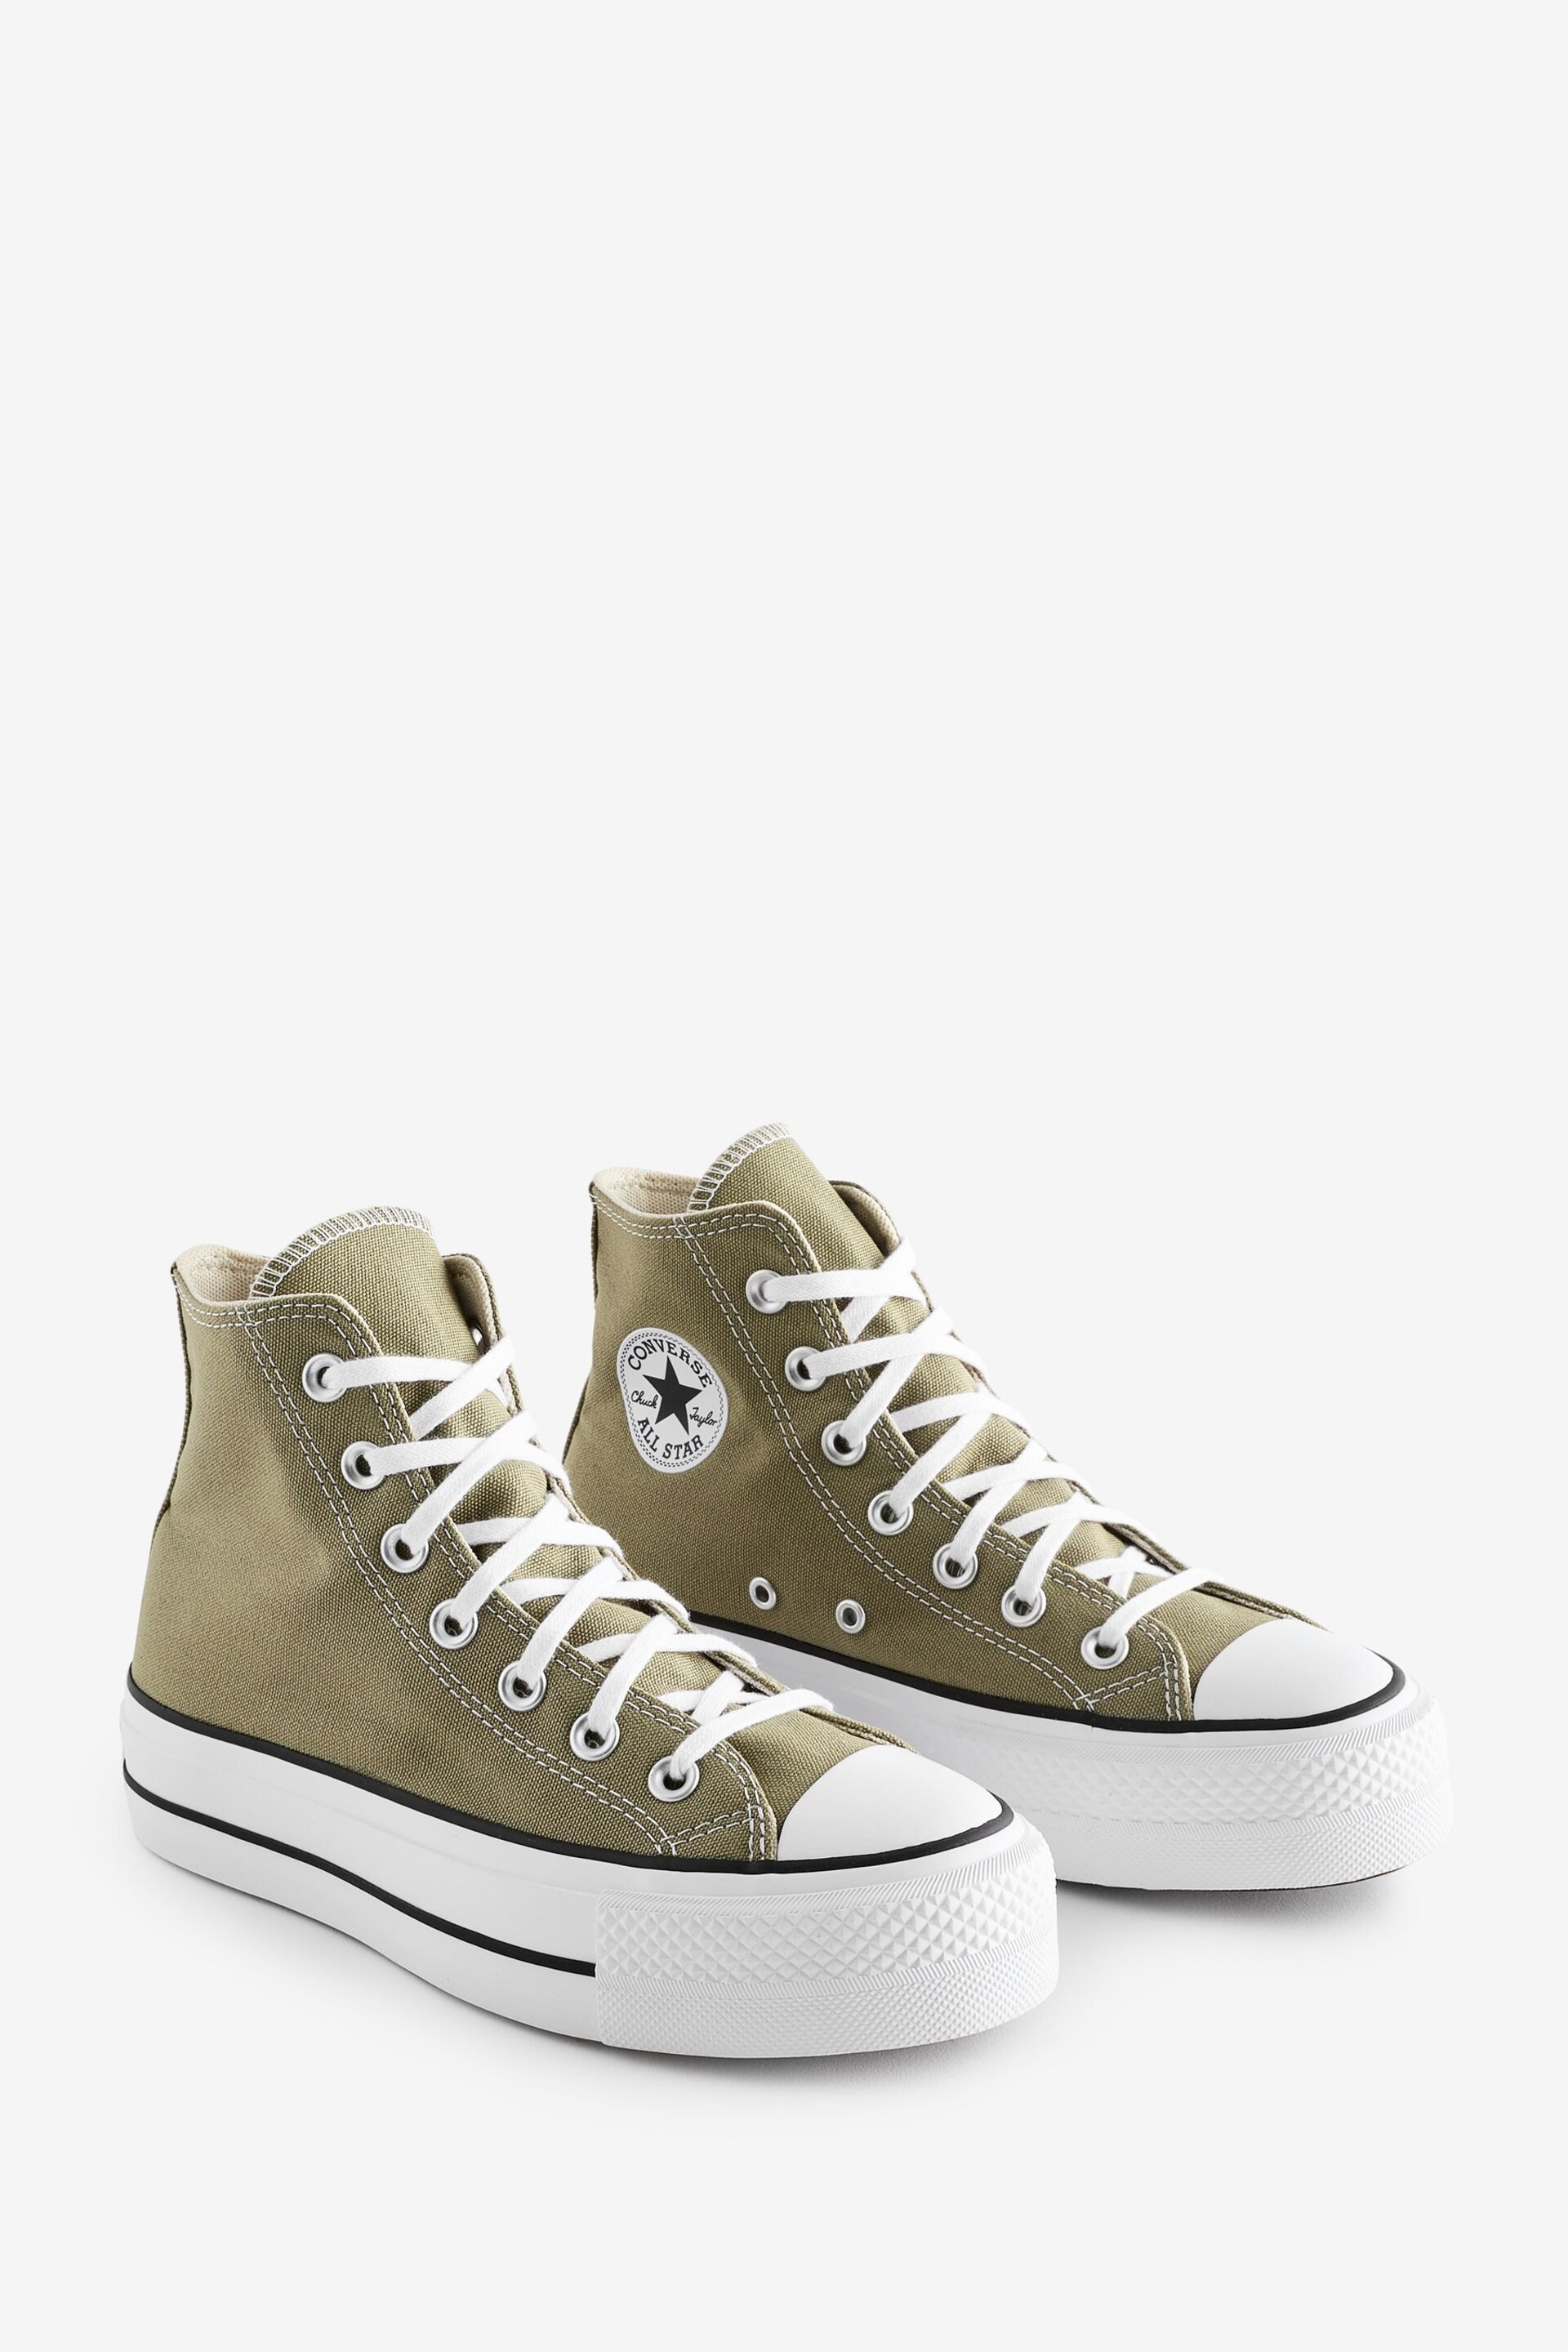 Converse Khaki Green Chuck Taylor All Star High Top Lift Trainers - Image 3 of 9